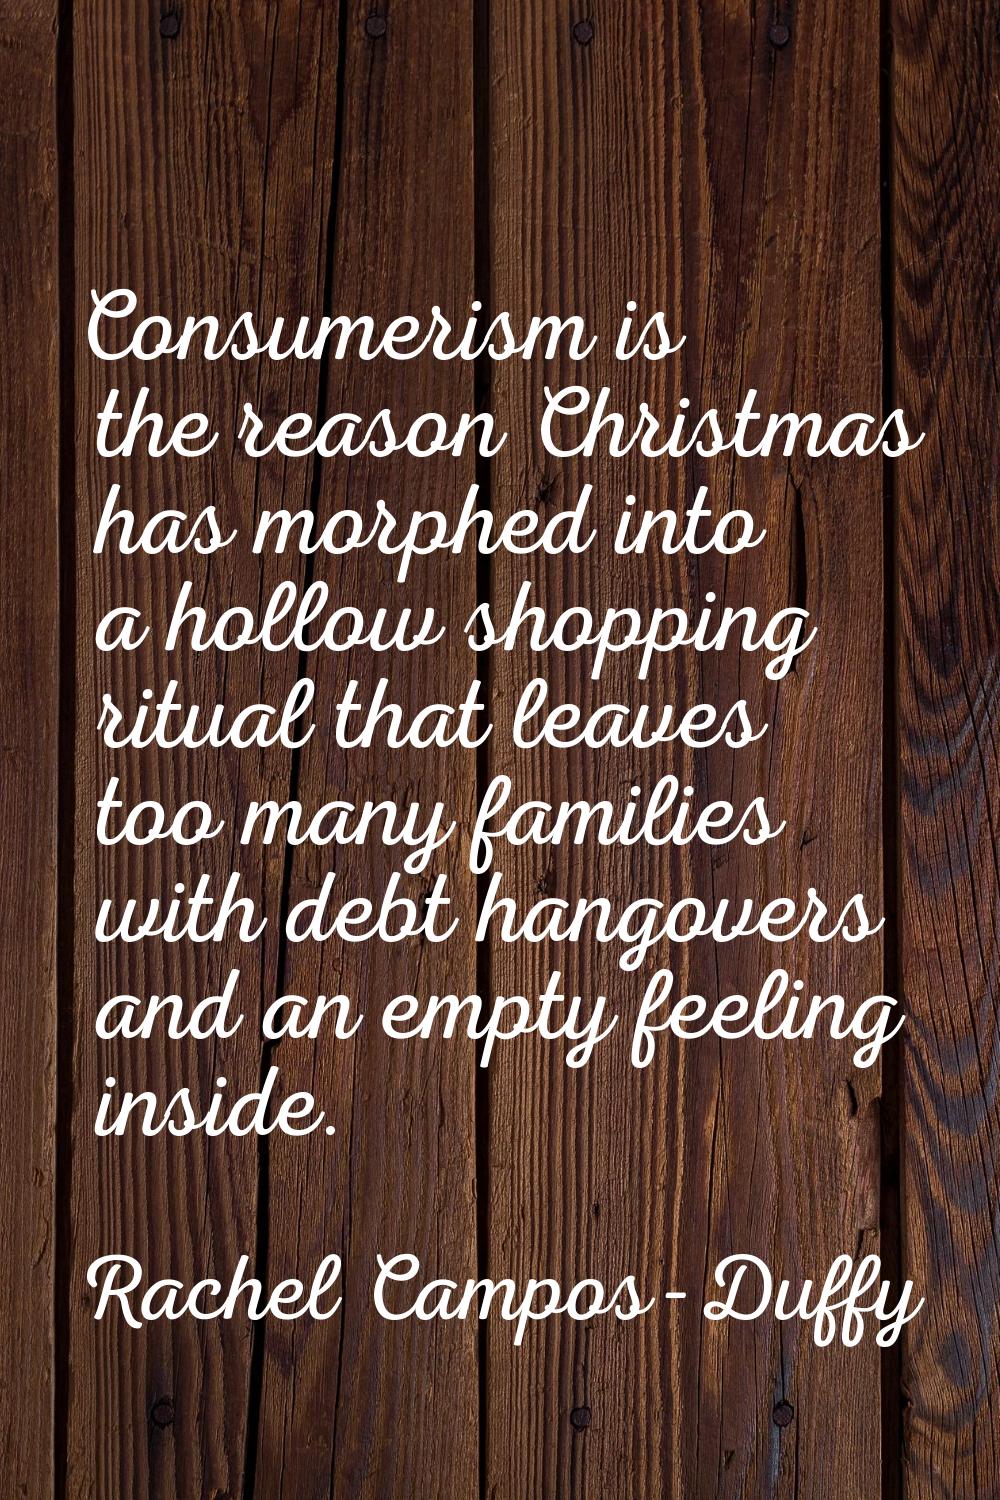 Consumerism is the reason Christmas has morphed into a hollow shopping ritual that leaves too many 